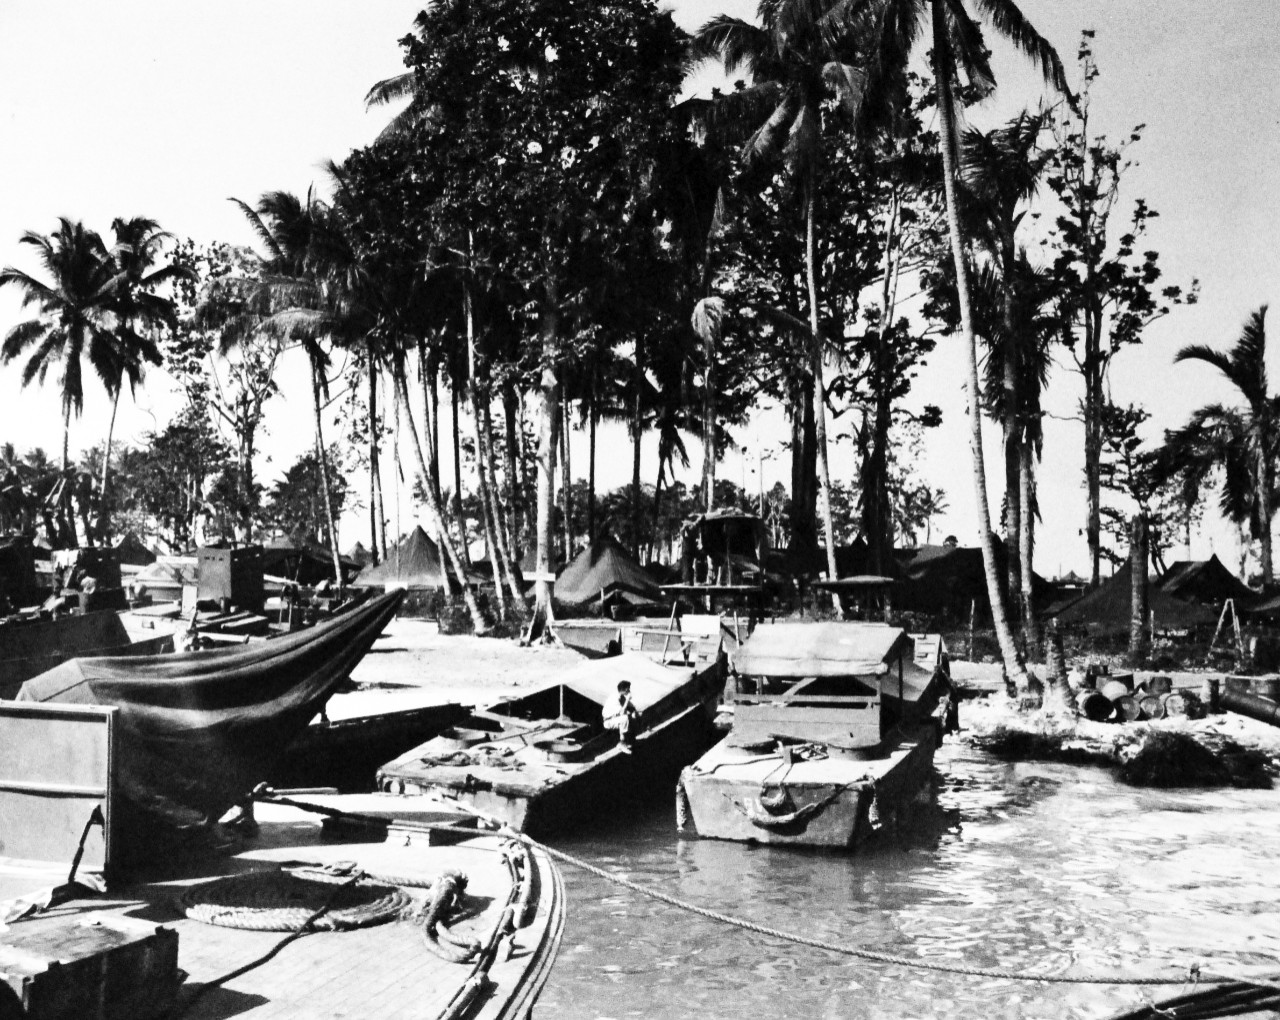 80-G-59330:   Bougainville Campaign, November 1943-August 1945.   U.S. Navy Motor Torpedo Base, Bougainville, Solomon Islands, 10 March 1944.  Bow of PT boat in left fore-ground.  Other boats are part of boat pool.  MTB base signal tower is in center.    Official U.S. Navy Photograph, now in the collections of the National Archives.   (2014/3/12). 